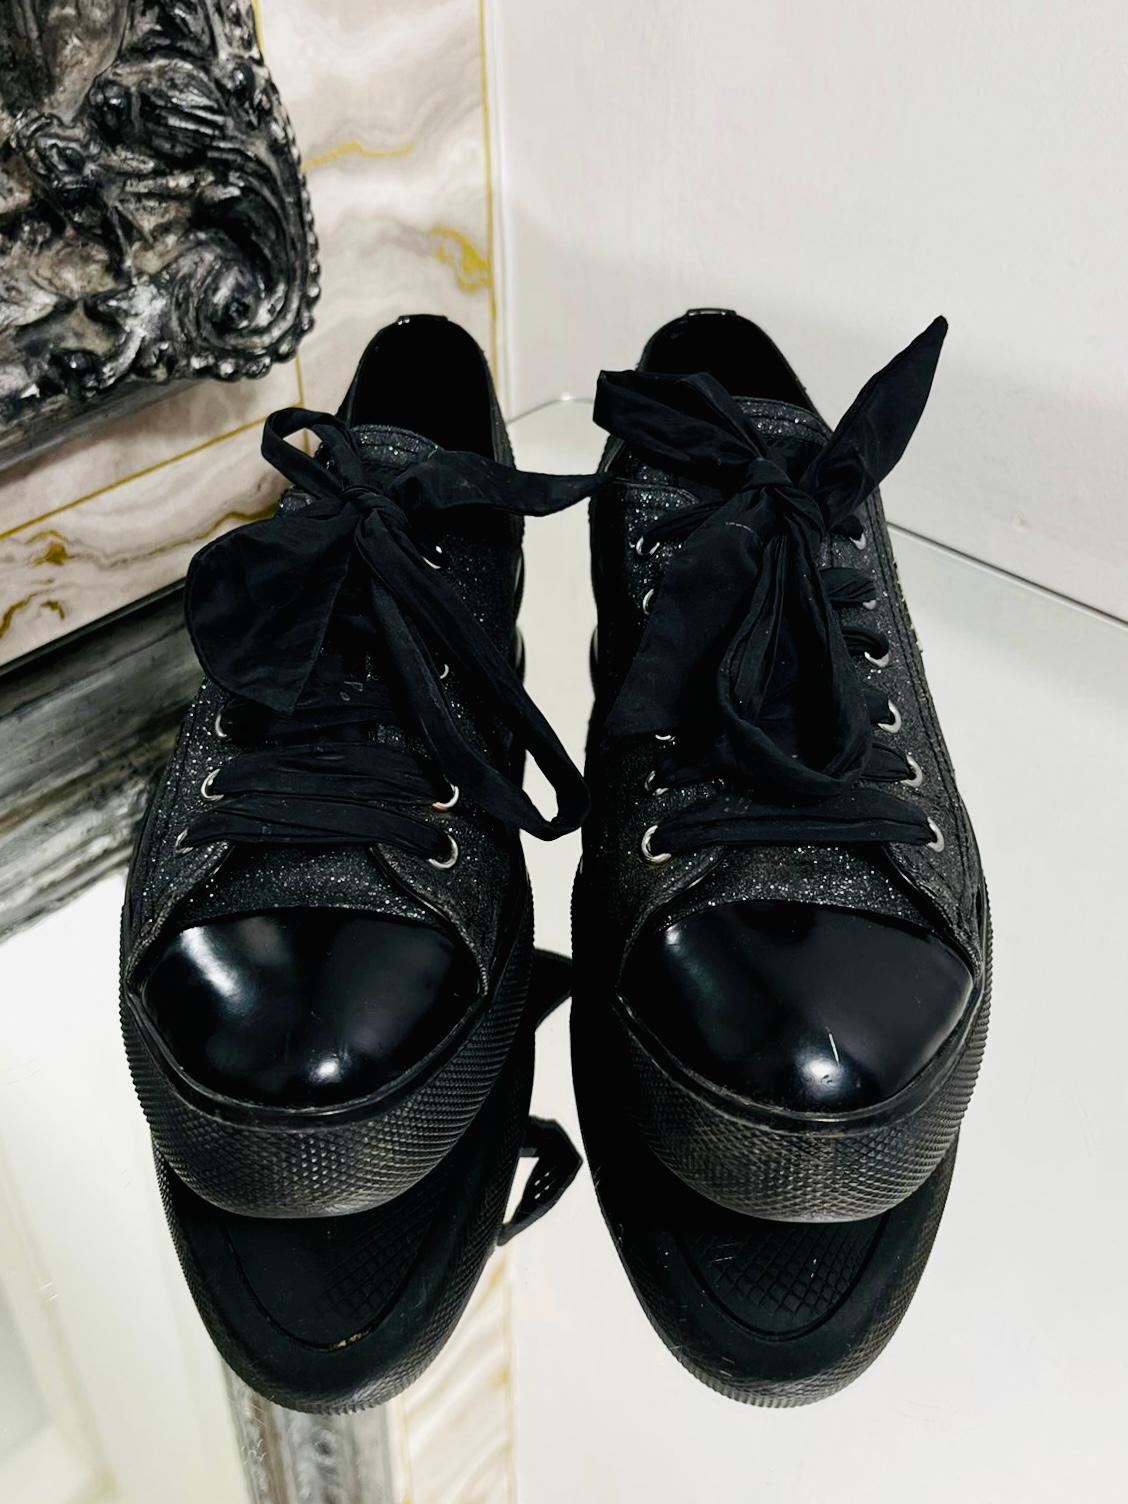 Prada Leather Glitter Sneakers

Black leather with glitter finish through out, with patent leather toe caps and heels.

Silver metal logo to each side and finished with ribbon laces. Rubber logo soles.

Size - 38

Condition - Good (A mark to one